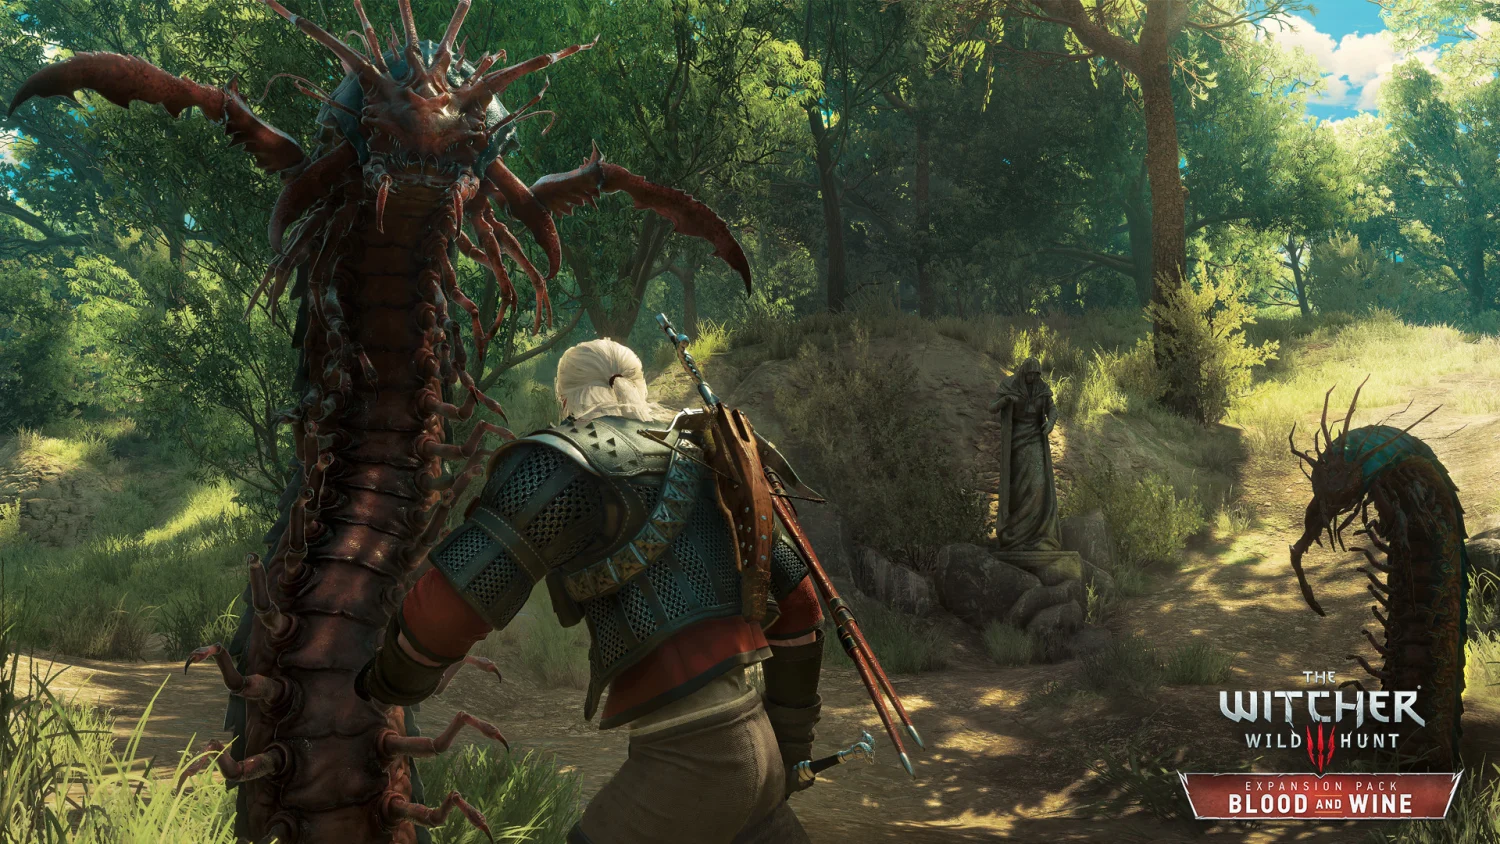 Jogo The Witcher 3 Game of the year PS4 no Paraguai - Atacado